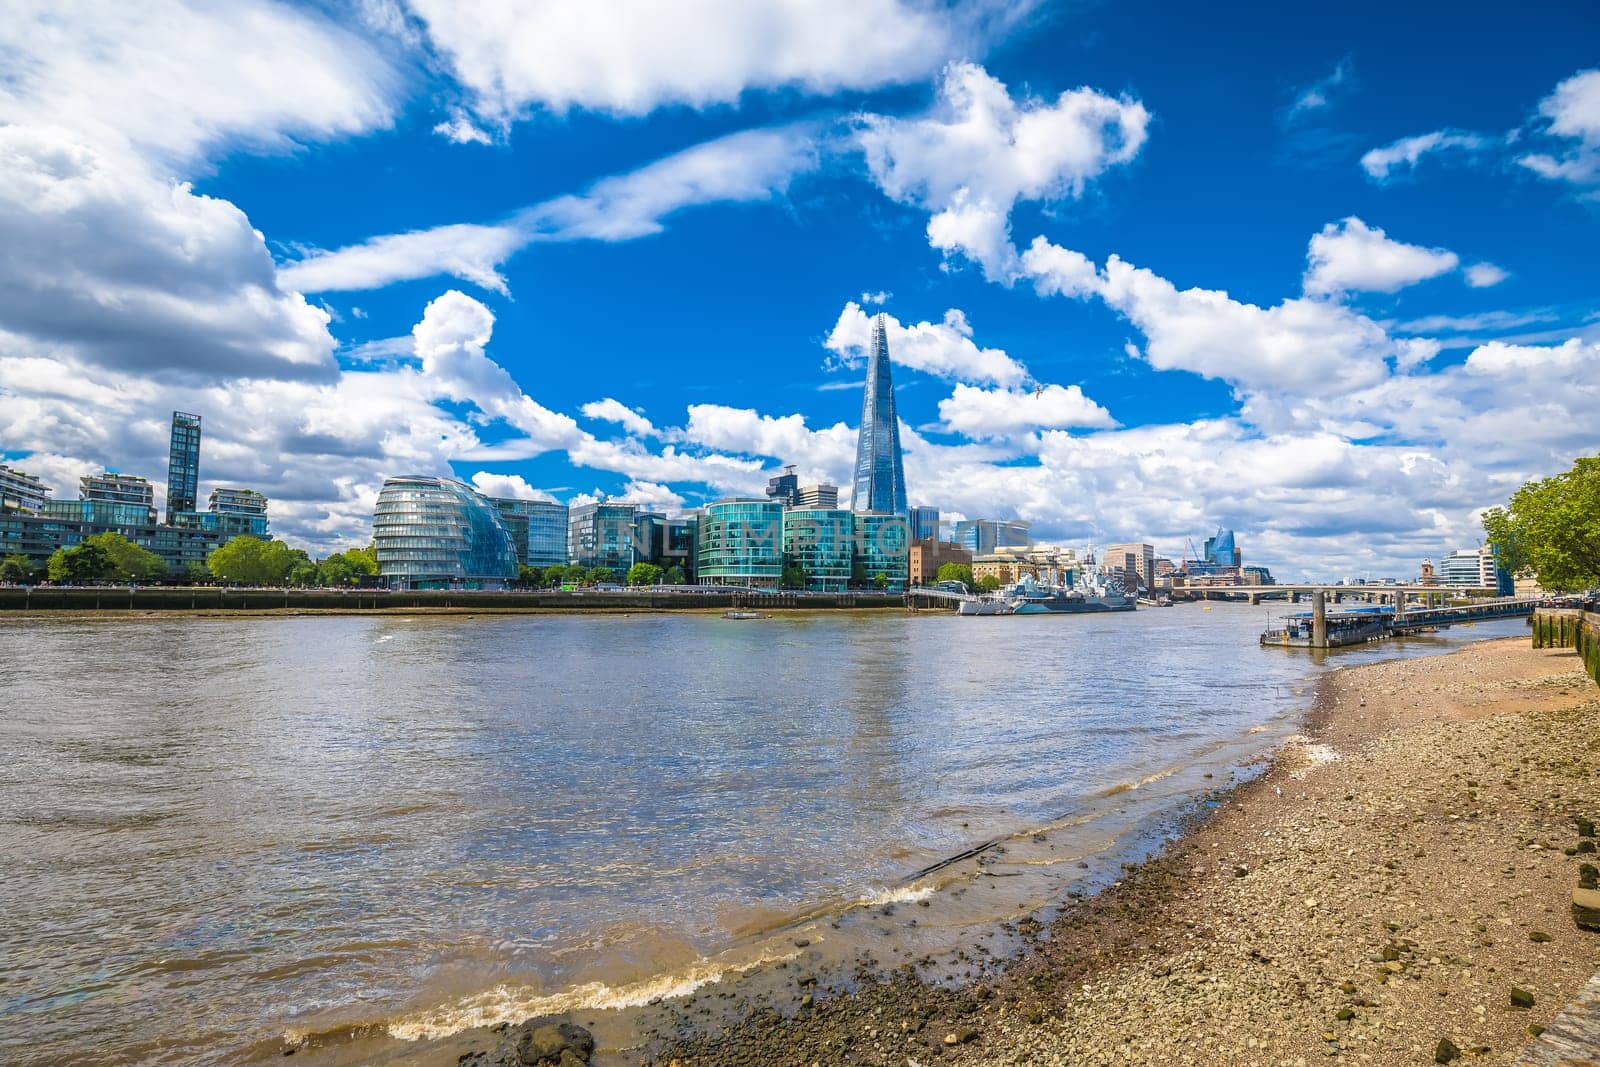 Thames river in London coastline and view to riverfront skyline, capital of United Kingdom